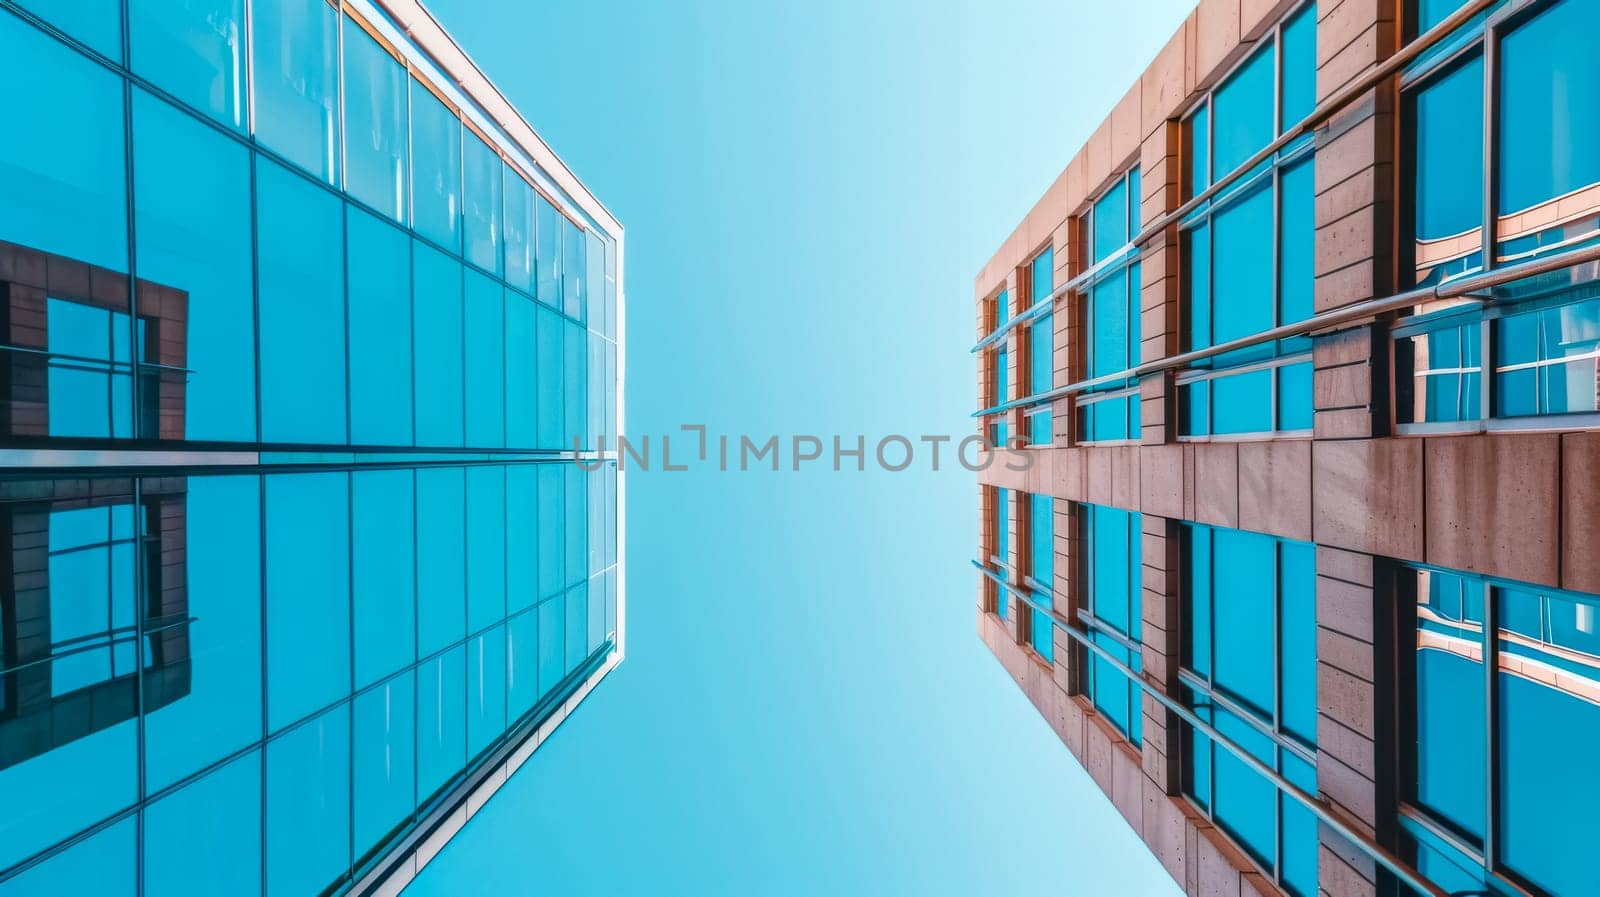 Symmetry of modern architecture against blue sky by Edophoto